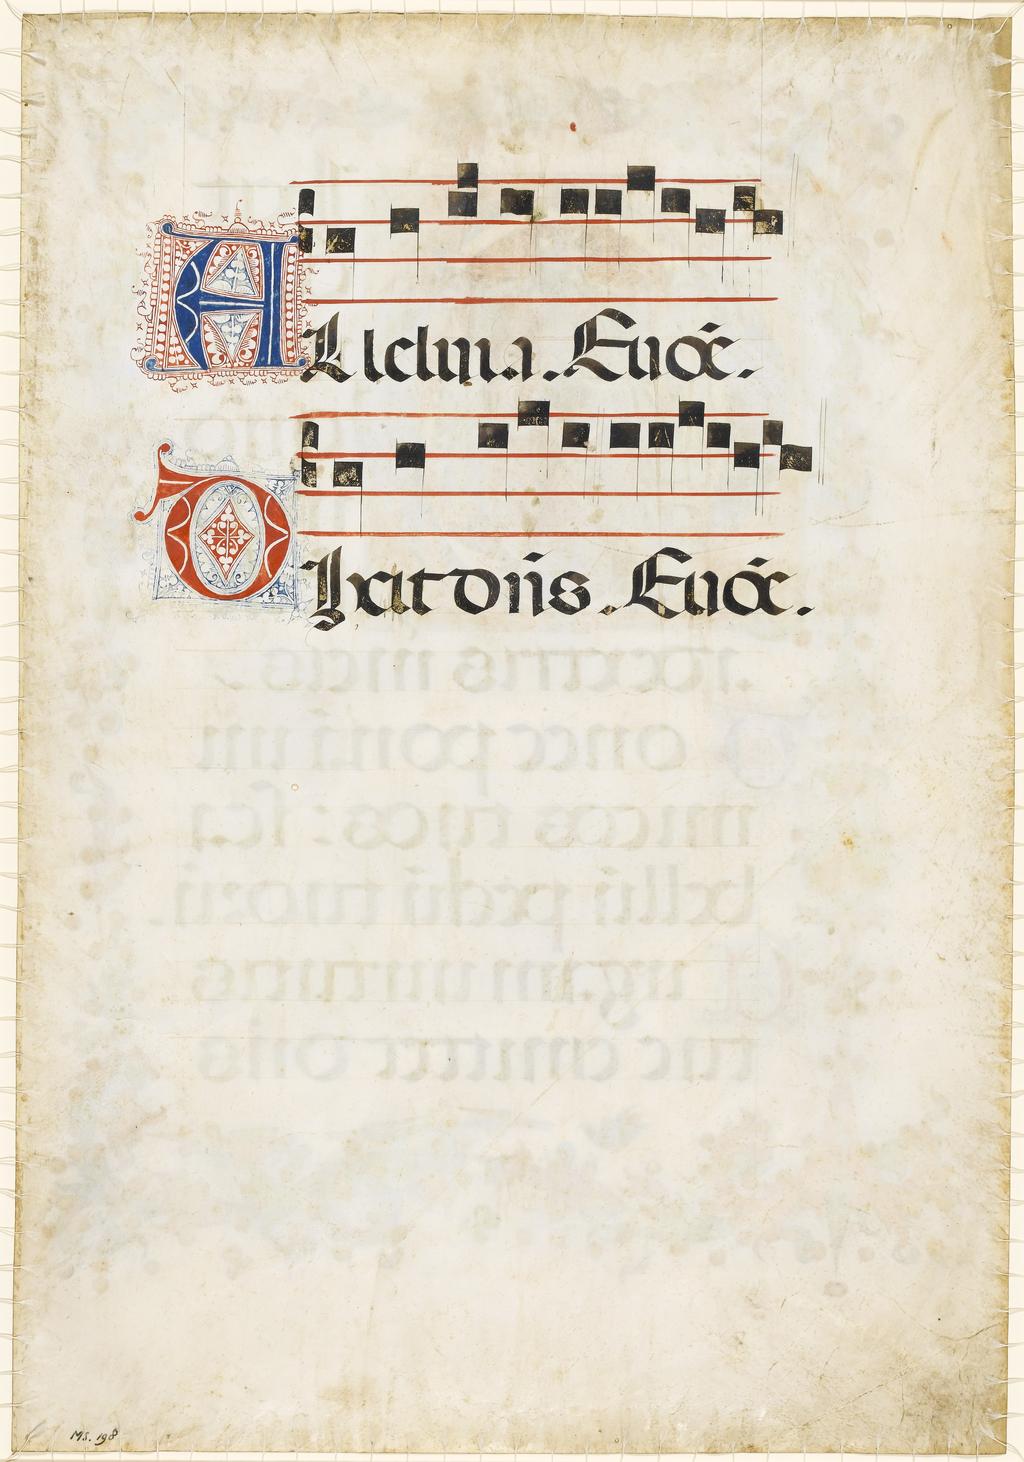 An image of Illuminated Manuscript. Leaf from a set of Choir books. Pietro, Sano di. Rossini, Pellegrino di Mariano. Parchment, gold, 588 x 400 mm (360 x 235 mm) 23 long lines, ruled in ink and accommodating two lines of text and two four-line musical staves ruled in red ink on the original recto of the leaf, and twelve lines of text on the original verso, circa 1460 to circa 1477. Production Place: Italy, Siena.CONTENTS: On reverse (original recto): two musical staves and two lines of text containing the Antiphon for the first psalm of the first nocturn of Vespers for a Sunday in the Easter season, Aleluia. Euoue Dixit dominus [Domino meo sede a dextris meis] Euoue; the initial, which would have been on the original verso, introduced Ps. 109:1-2, Dixit dominus domino meo…virgam virtutis tuae emittet dominus. DECORATION: Historiated initial in graded blue on burnished gold ground, with acanthus leaves extending into full borders containing birds, putti and gold balls: Ps 109:1, [D, 11 ll.] King David enthroned, flanked by two attendants, and trampling on an enemy. ORNAMENTATION: Alternate blue and red penwork initials [2-4 ll.] with reserved ornament, and red and blue pen-flourished infill and frames.